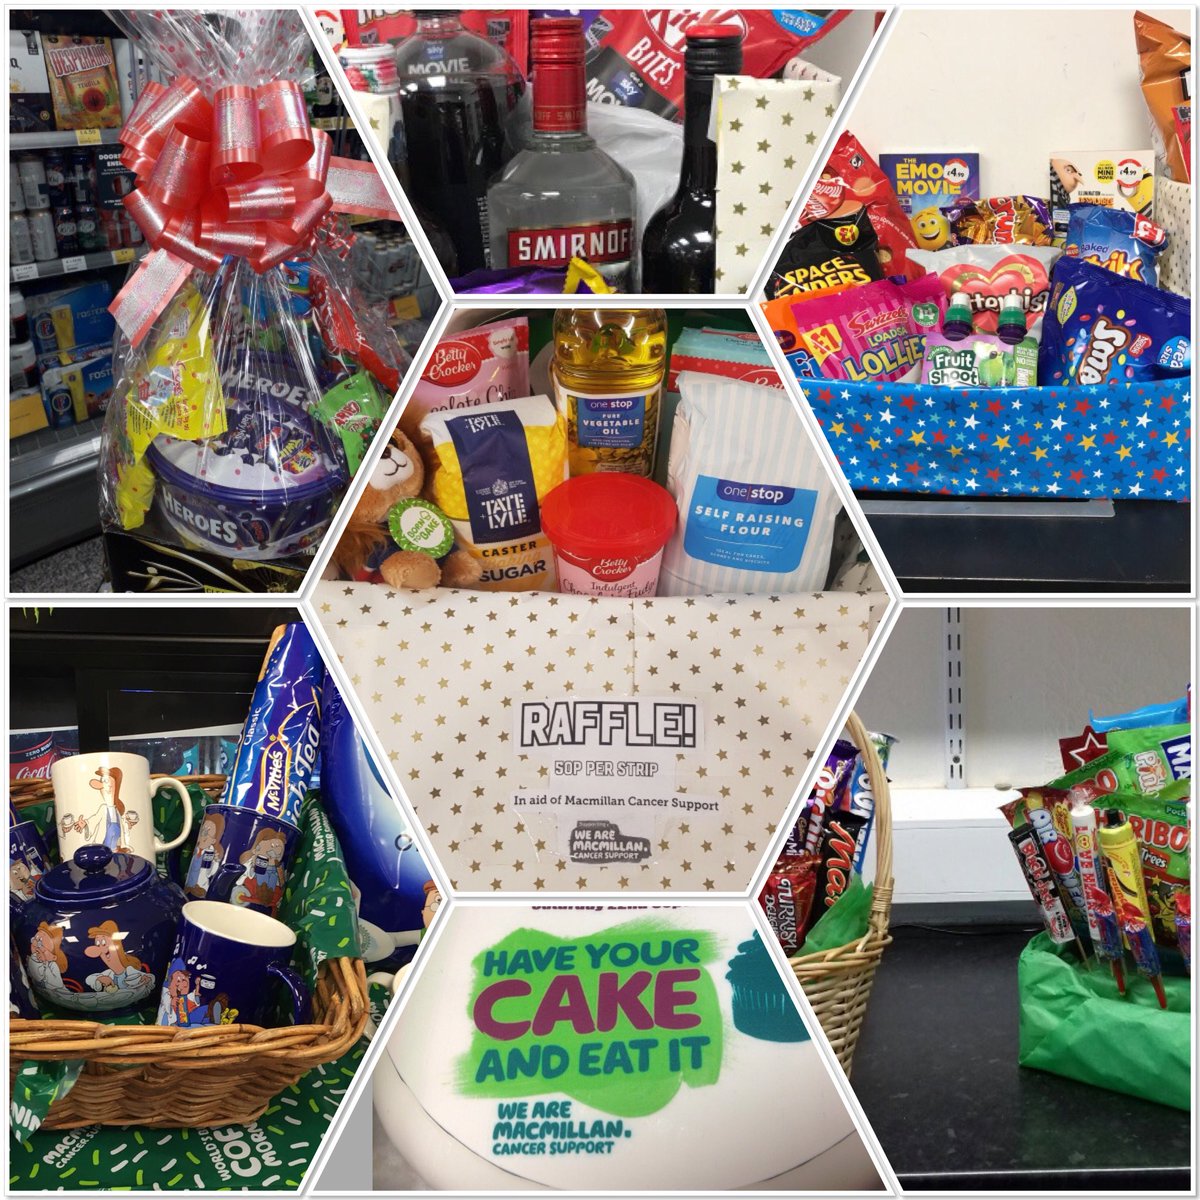 It’s @macmillancancer week at One Stop  pop into your local store to see what’s going on. We have lots of tasty treats, raffles, hampers and pop up cafes for everyone to get involved with. All in support of this great cause, come along and join in the fun! #macmillan #welovecake